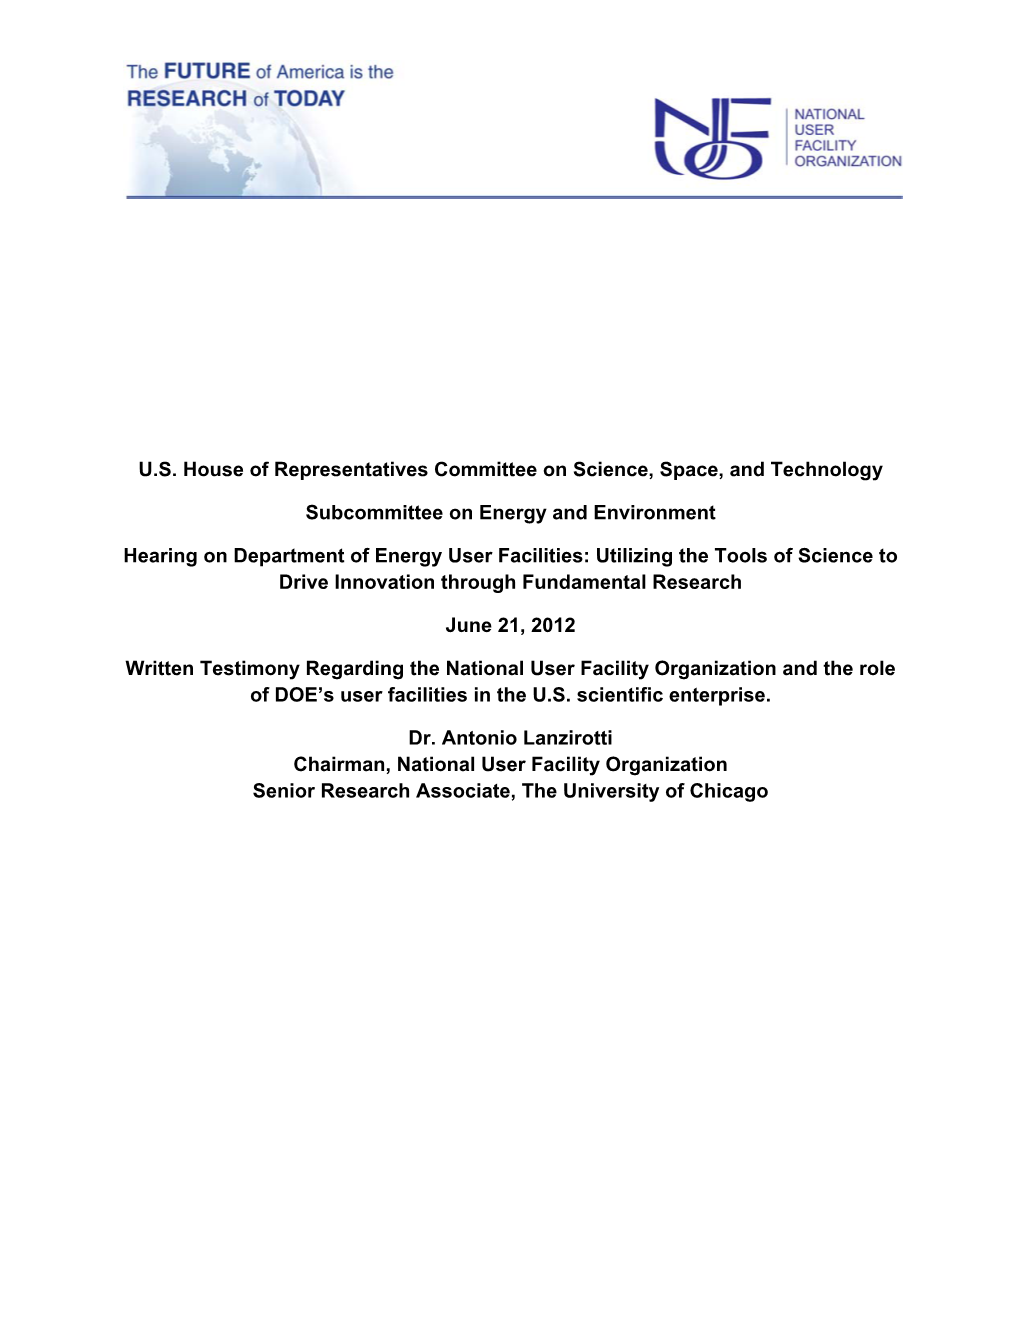 U.S. House of Representatives Committee on Science, Space, and Technology